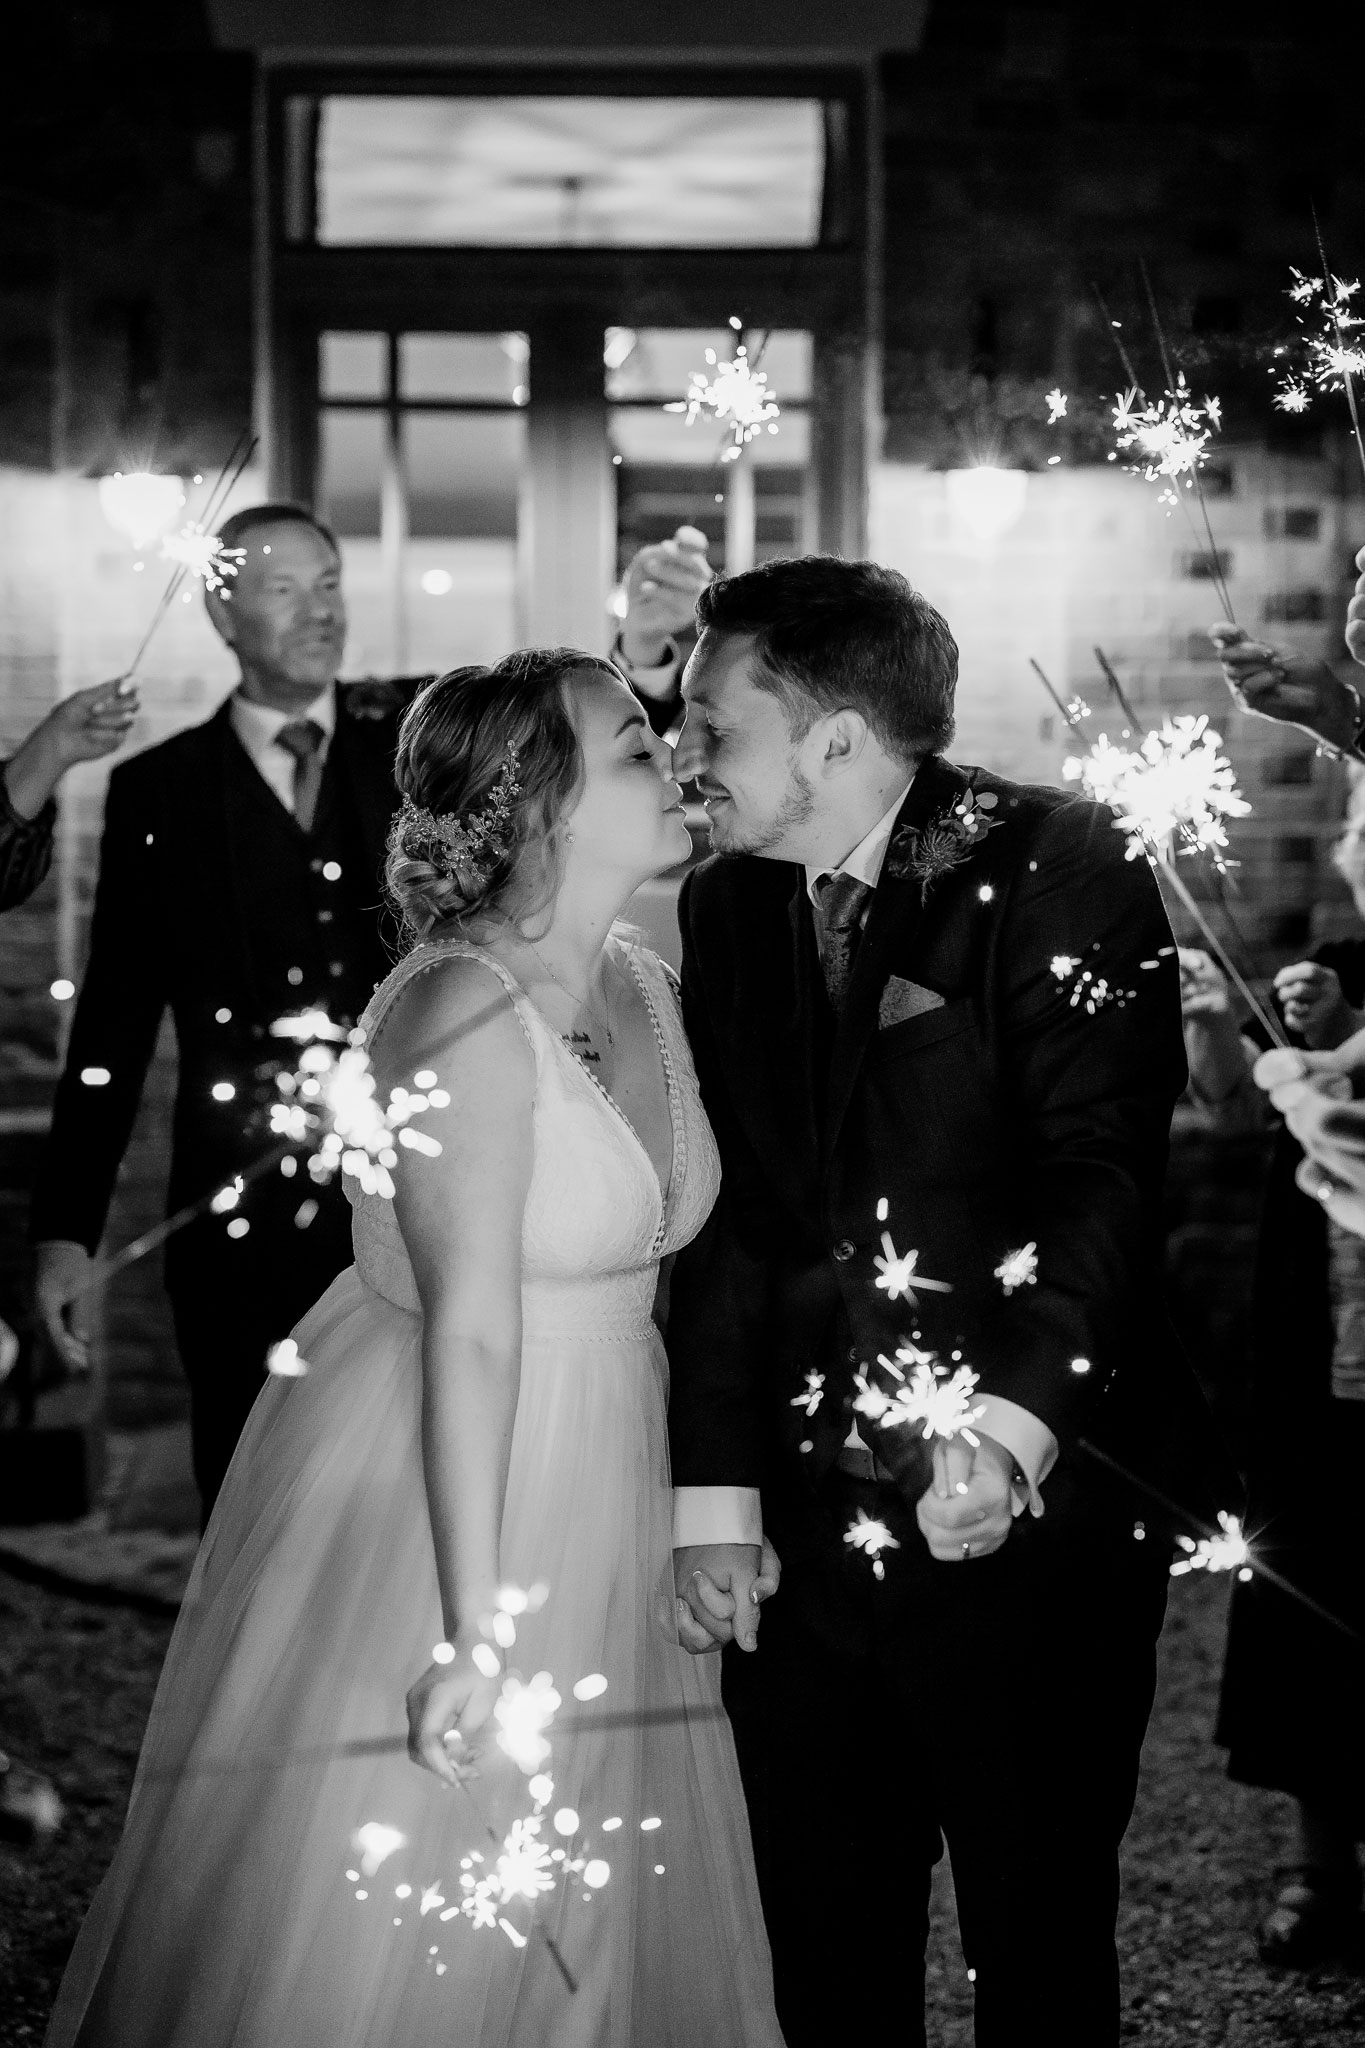 the bride and groom surrounded by sparklers